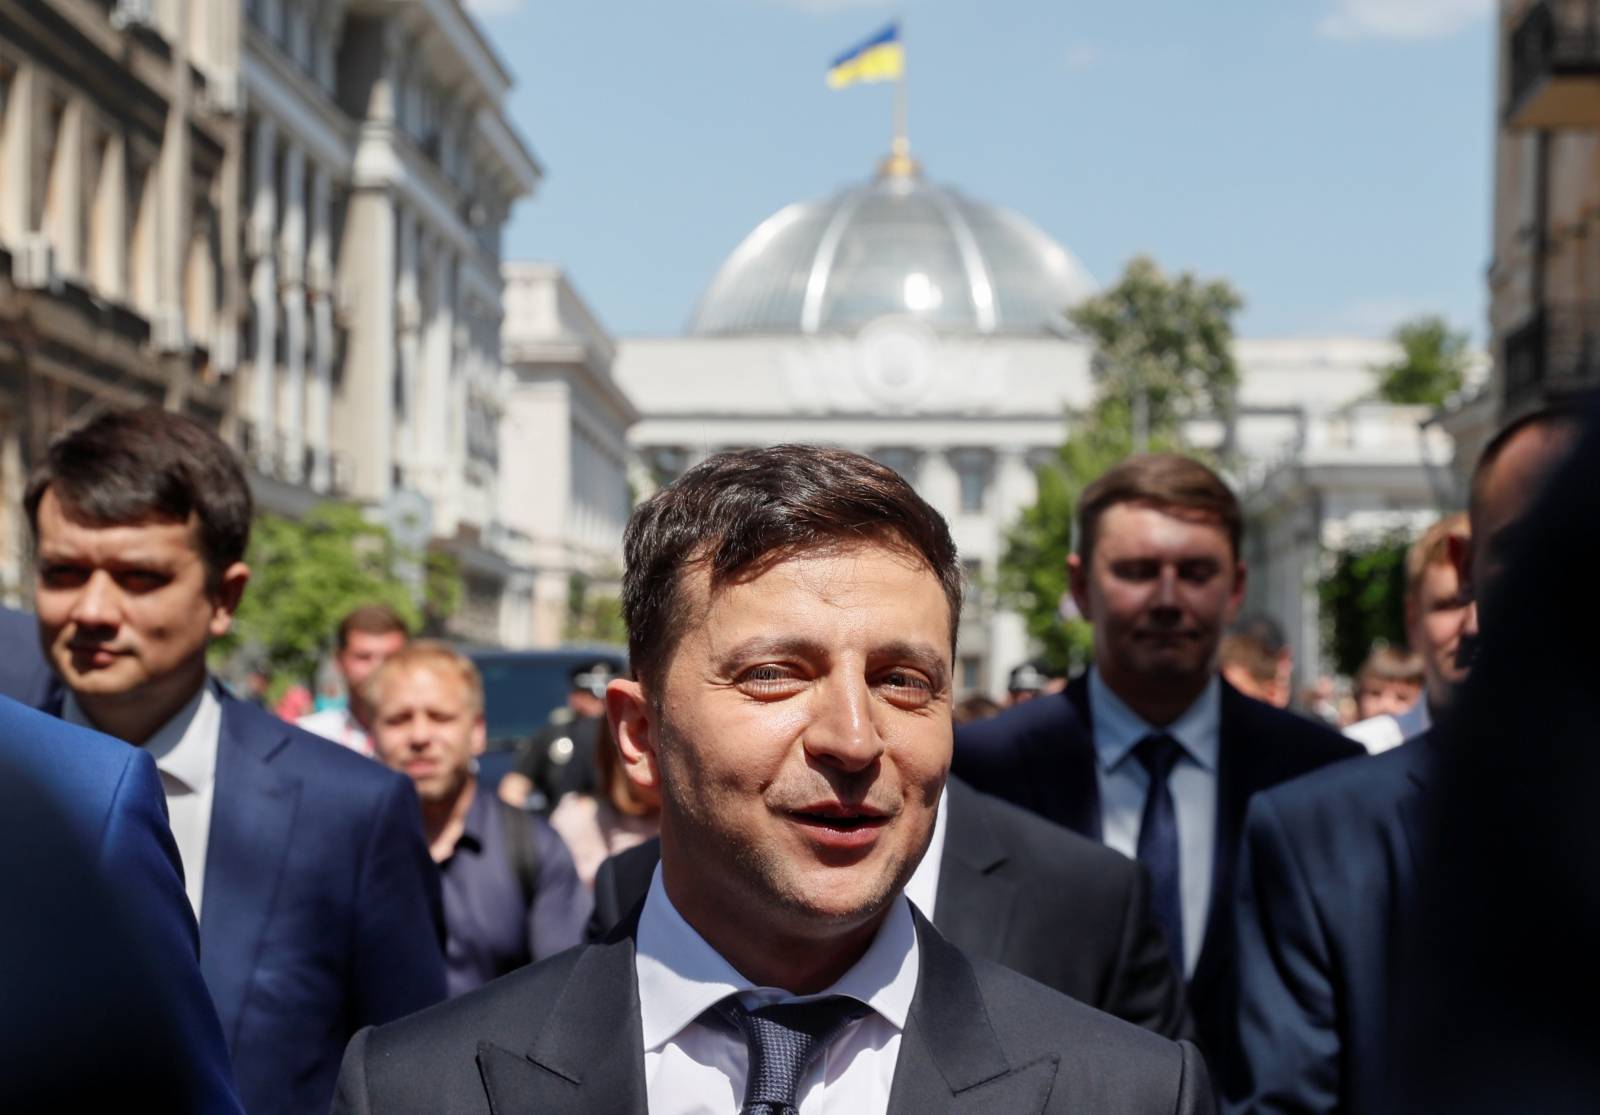 Ukraine's President Volodymyr ZelenskiyÂ walks from the parliament to the presidential administration office after his inauguration in Kiev